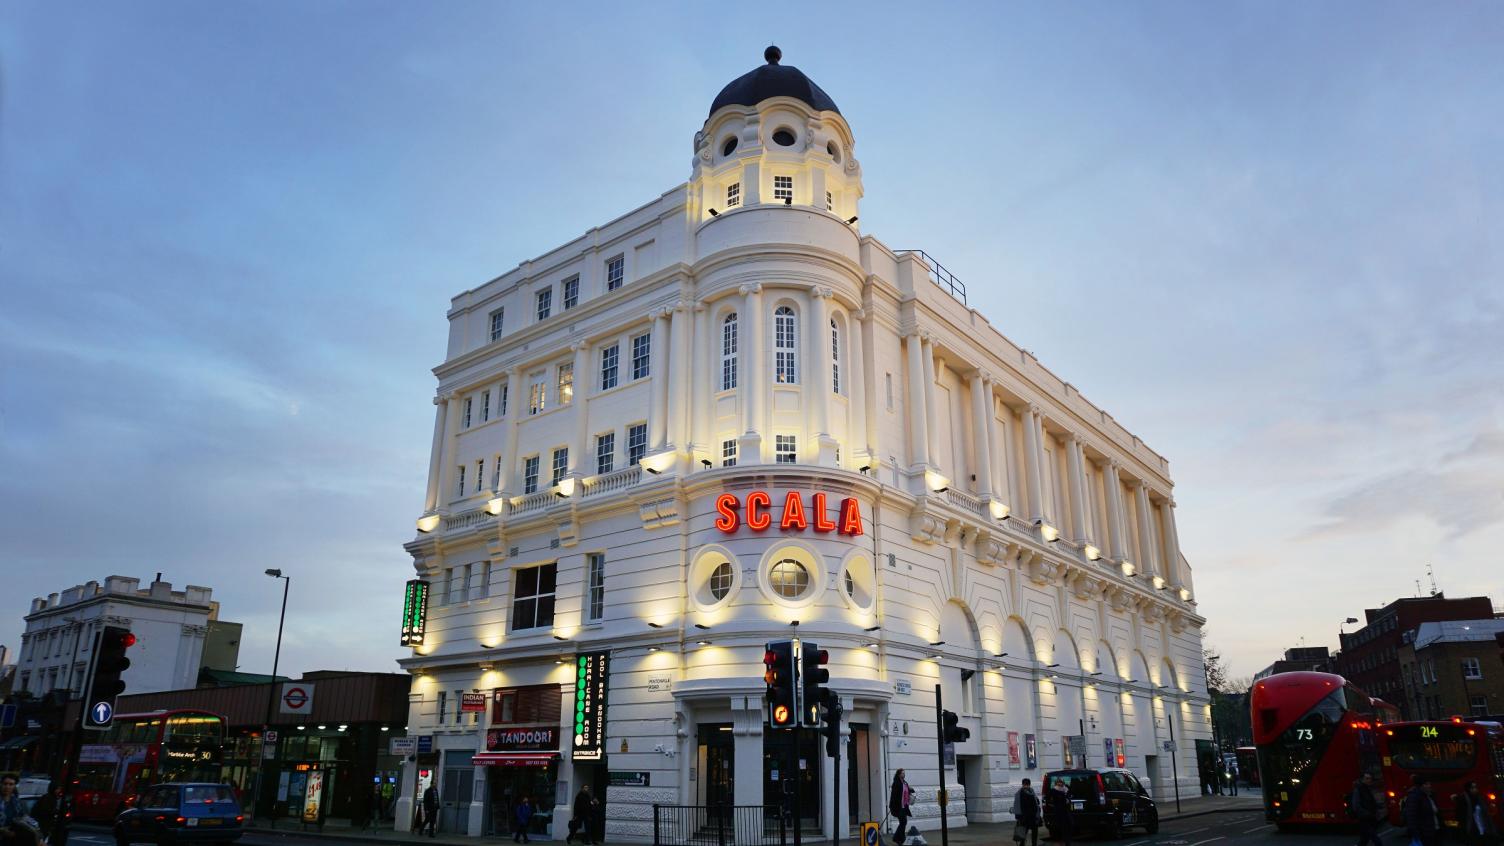 A large white building with 'Scala' on the front in bright read lettering